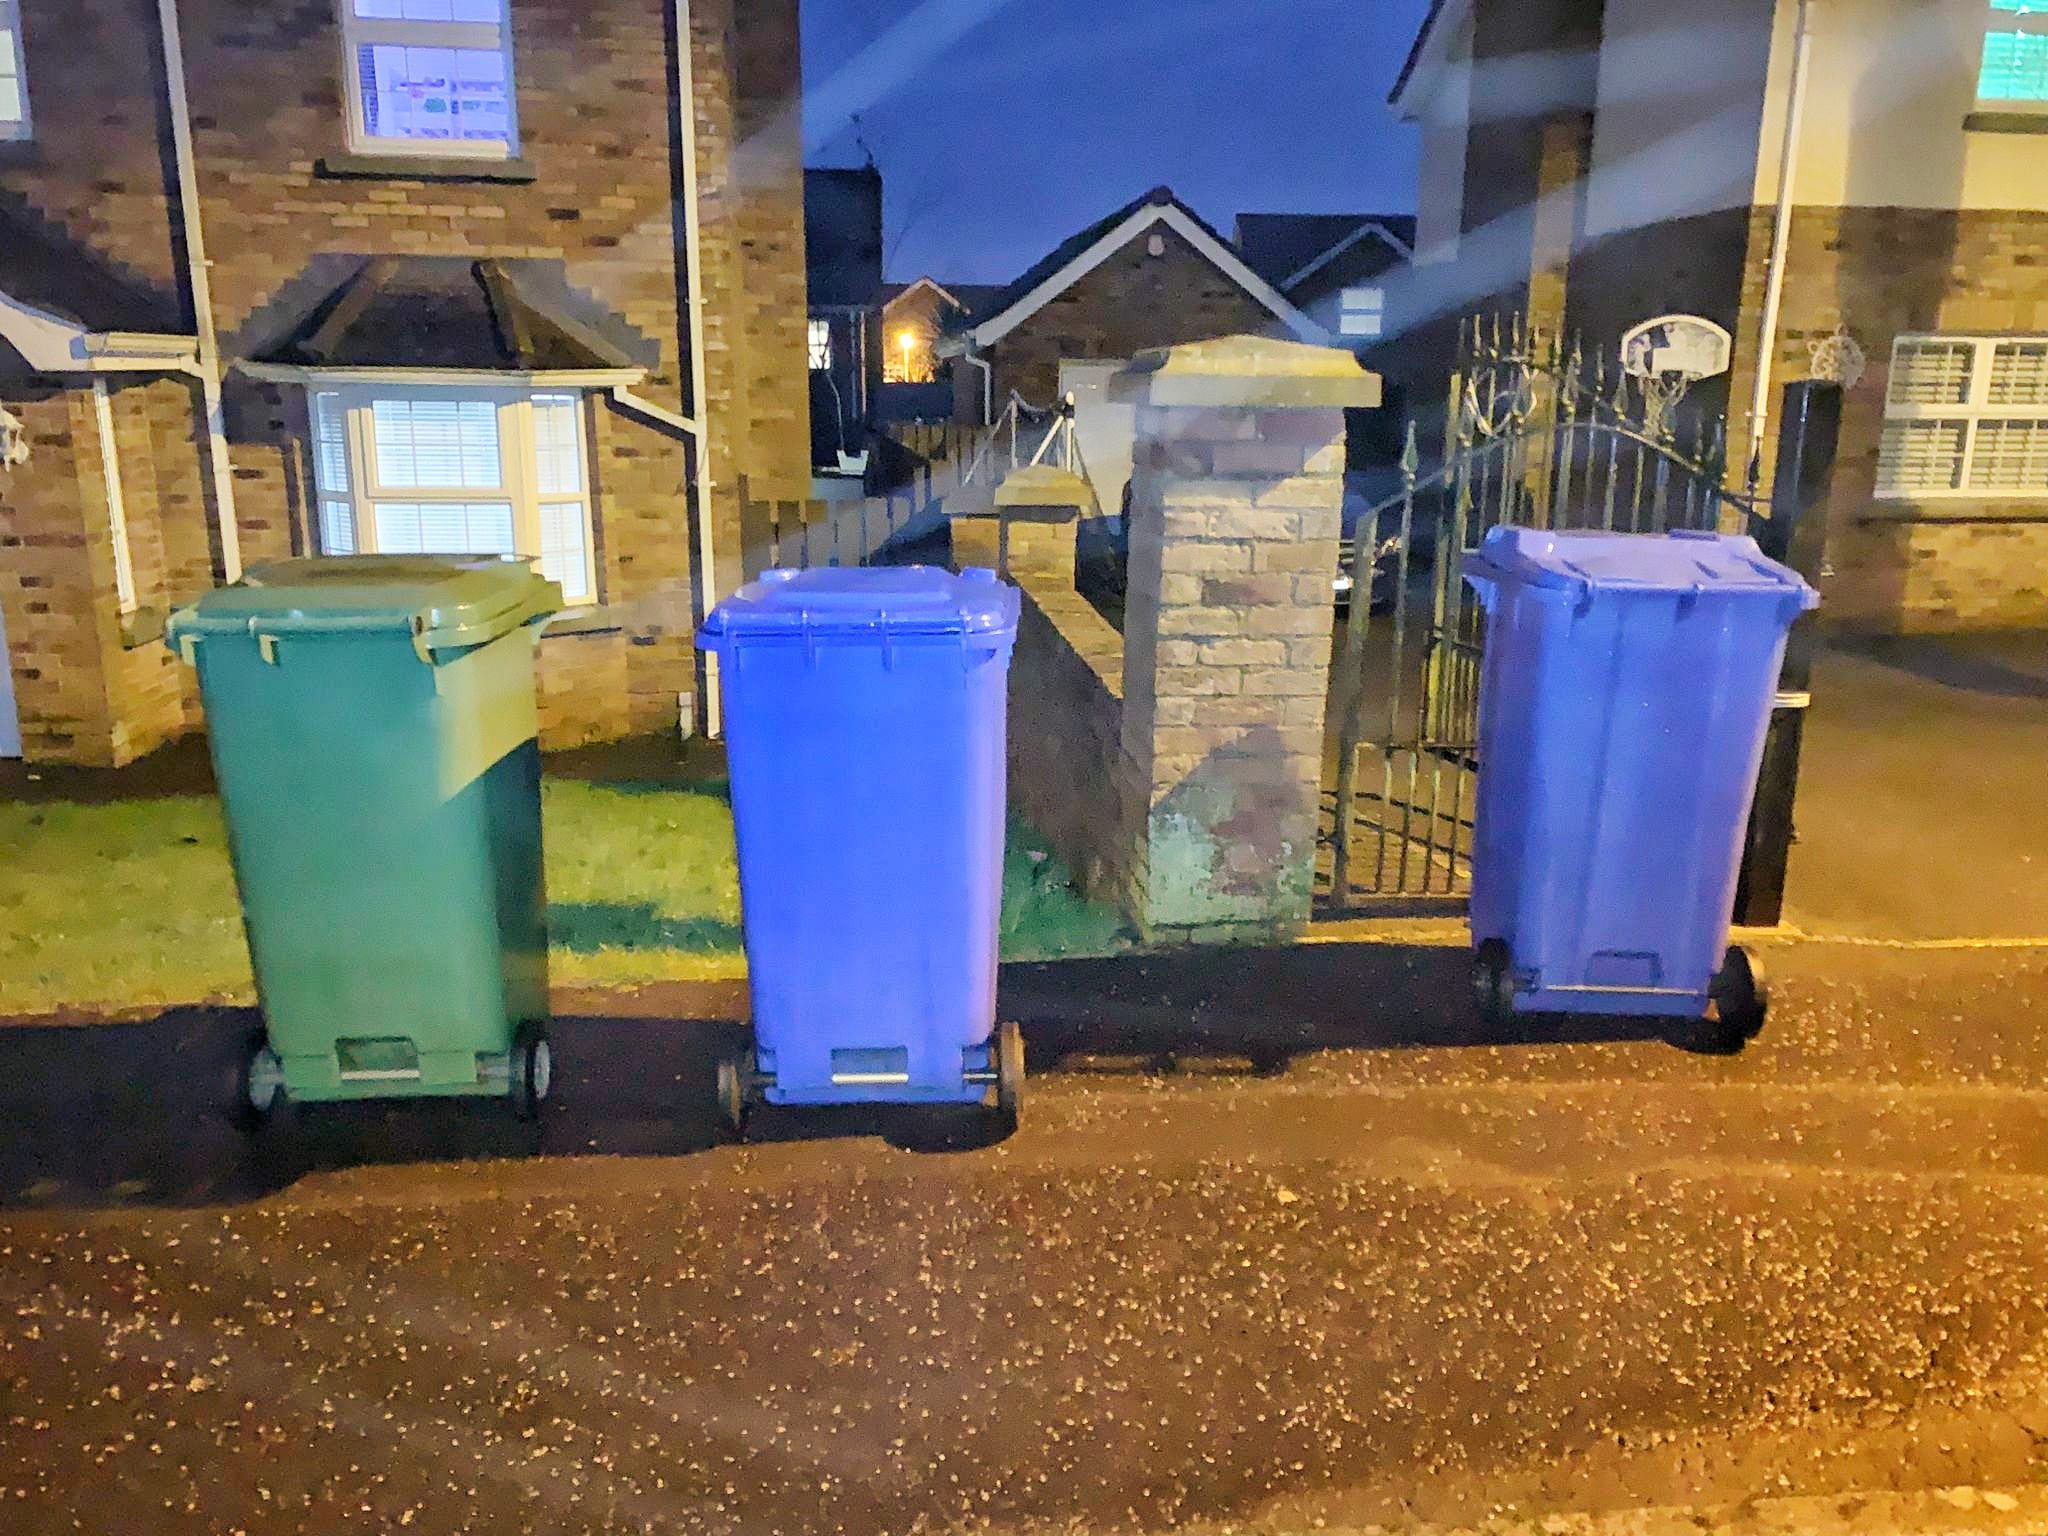 UNEMPTIED: Cllr Joe Duffy has said he is working with Council to address issues around missed bin collections 